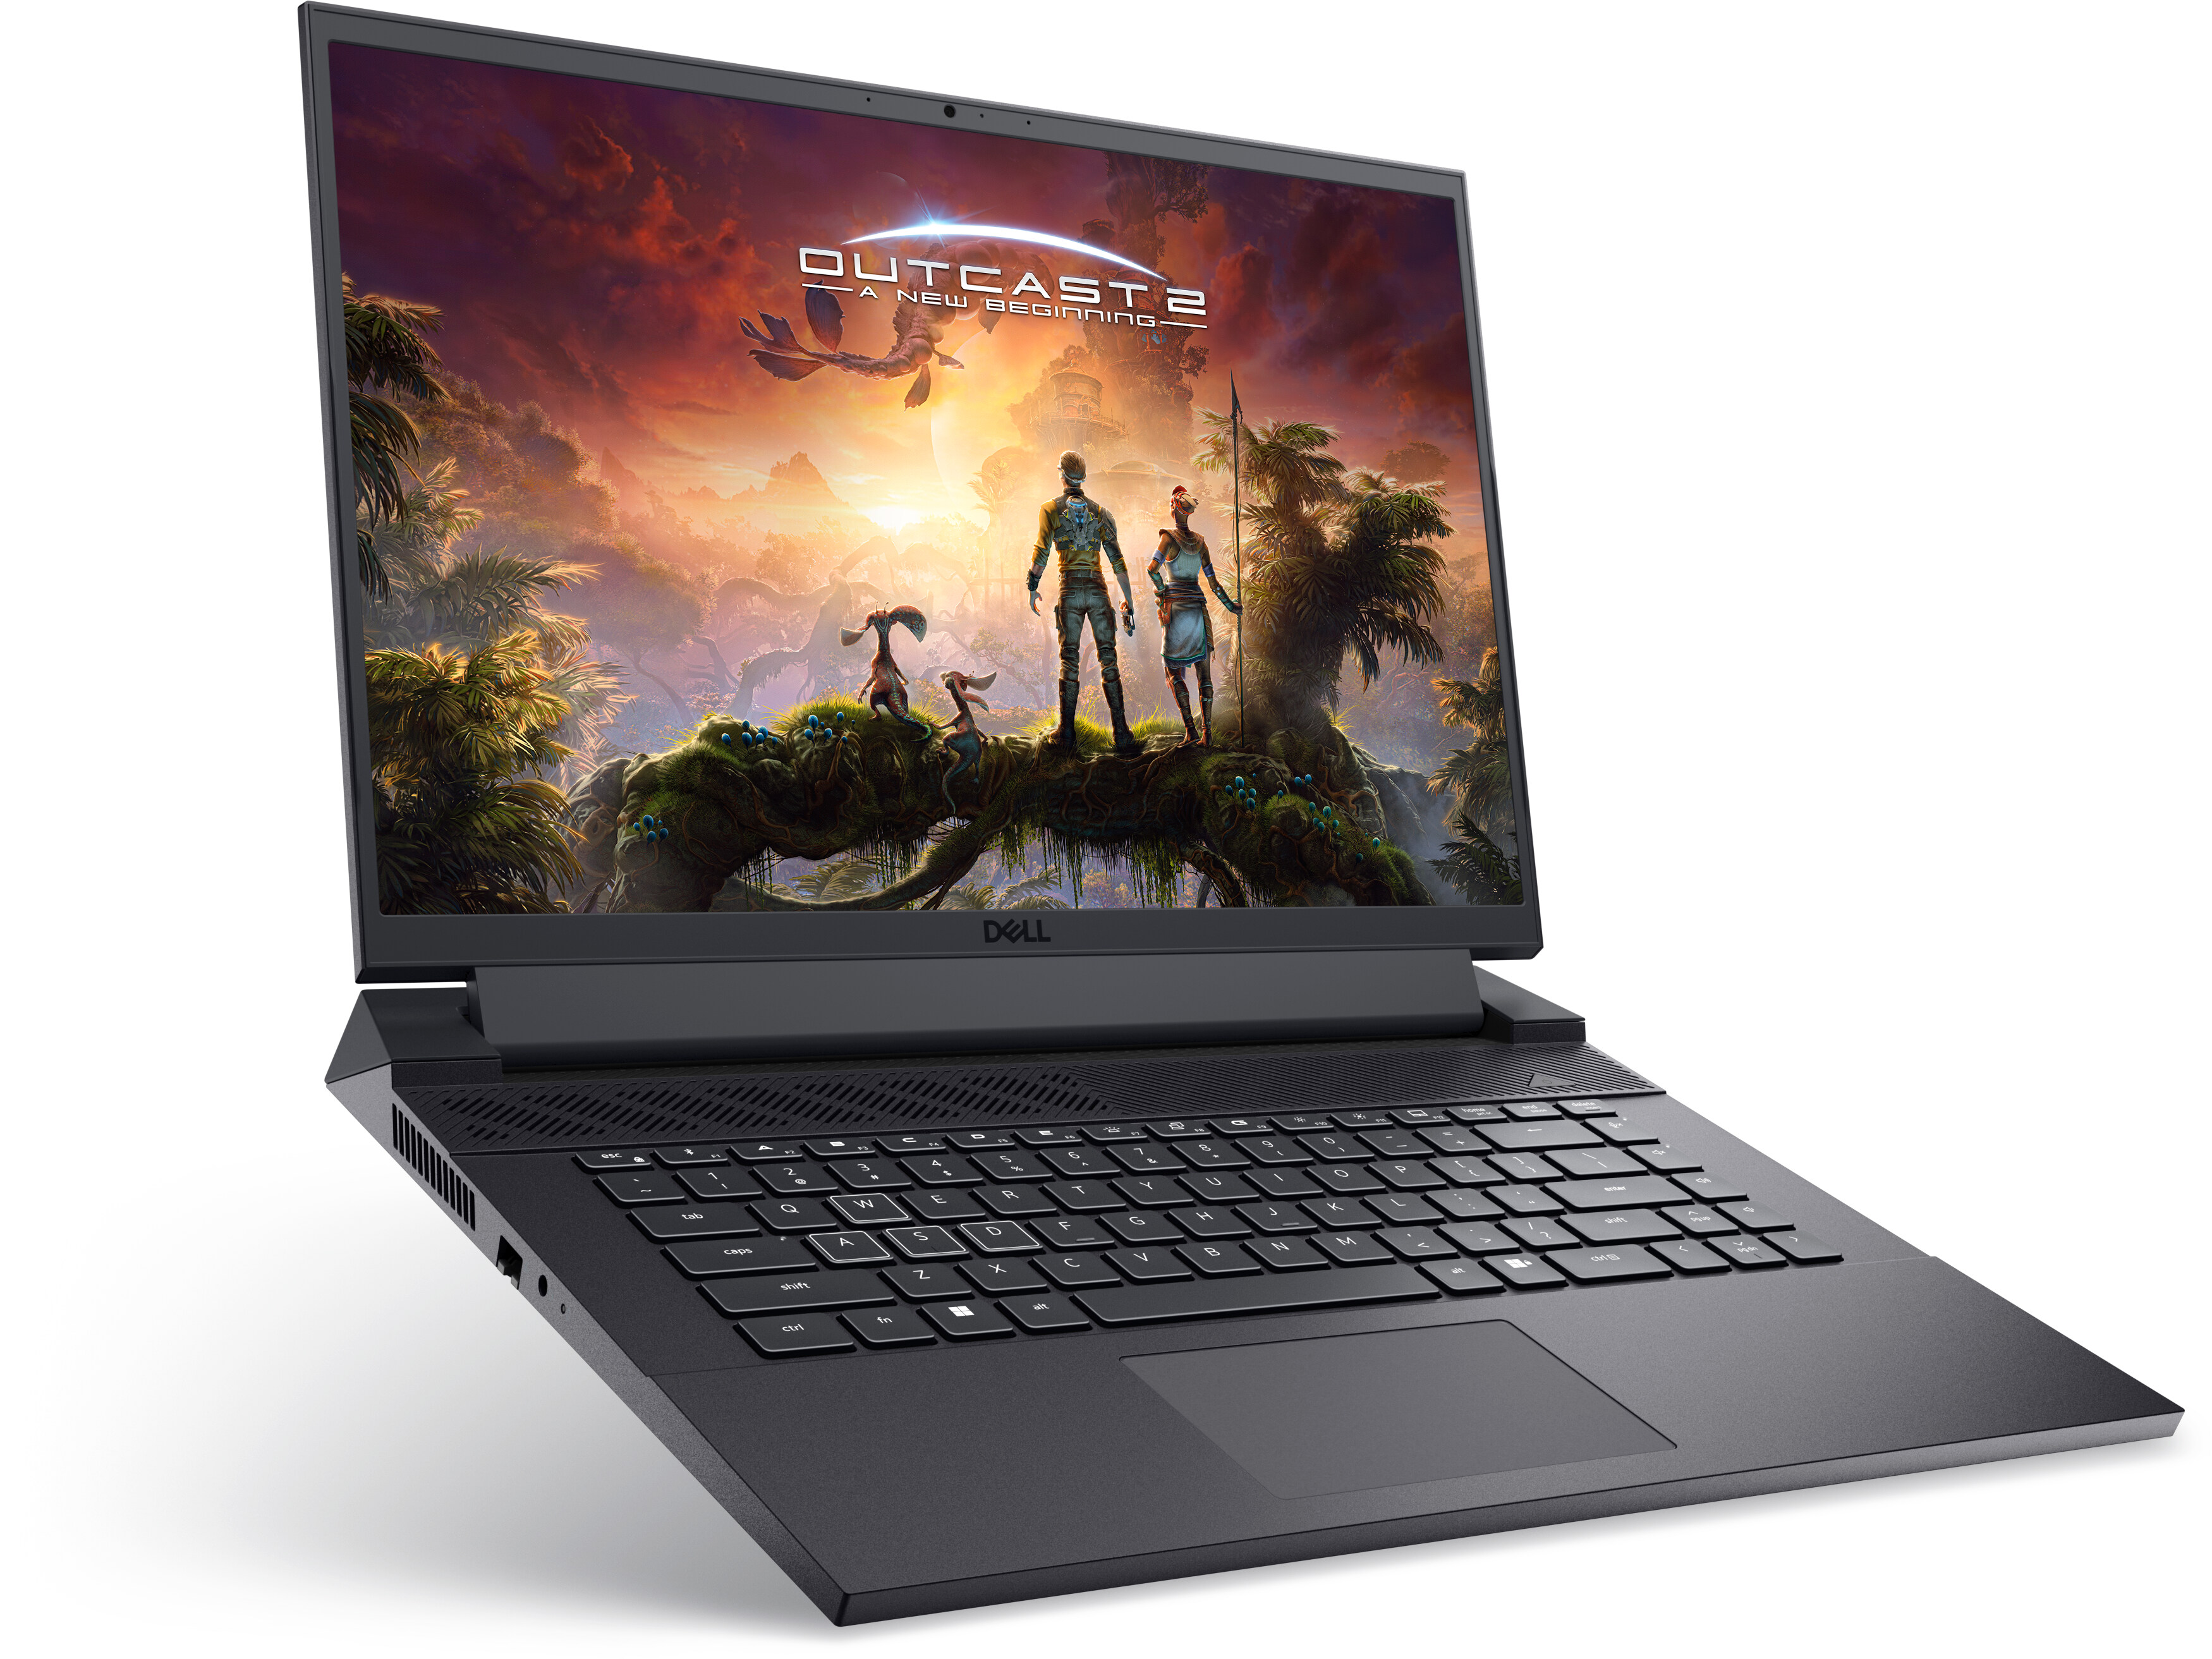 https://i.dell.com/is/image/DellContent/content/dam/ss2/product-images/dell-client-products/notebooks/g-series/g16-7630/media-gallery/black/notebook-g16-7630-nt-black-gallery-1.psd?fmt=pjpg&pscan=auto&scl=1&wid=3500&hei=2625&qlt=100,1&resMode=sharp2&size=3500,2625&chrss=full&imwidth=5000